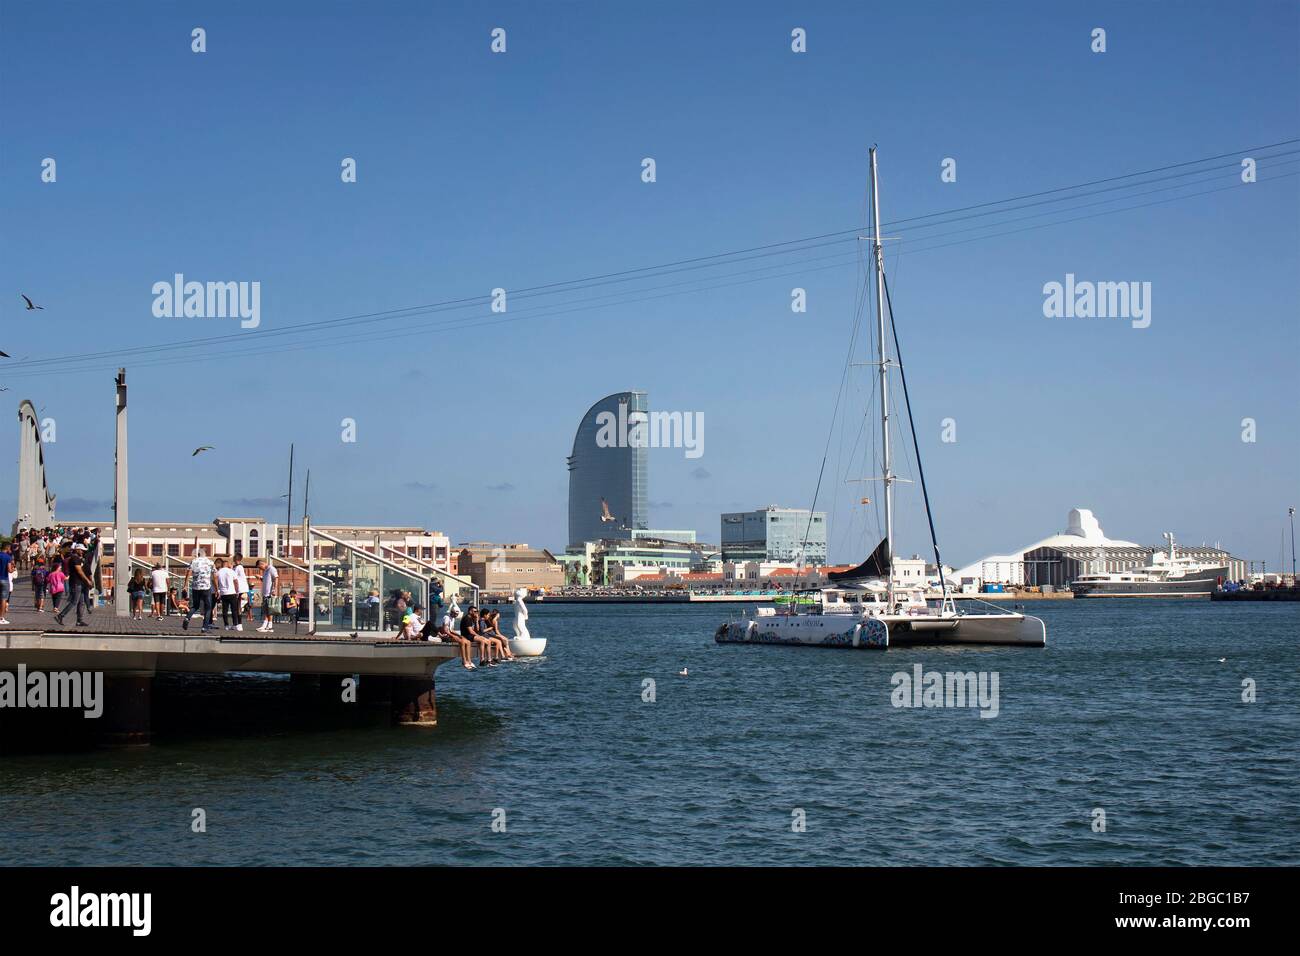 View of catamaran and people hanging out at Barcelona port. It is a sunny summer day. Stock Photo